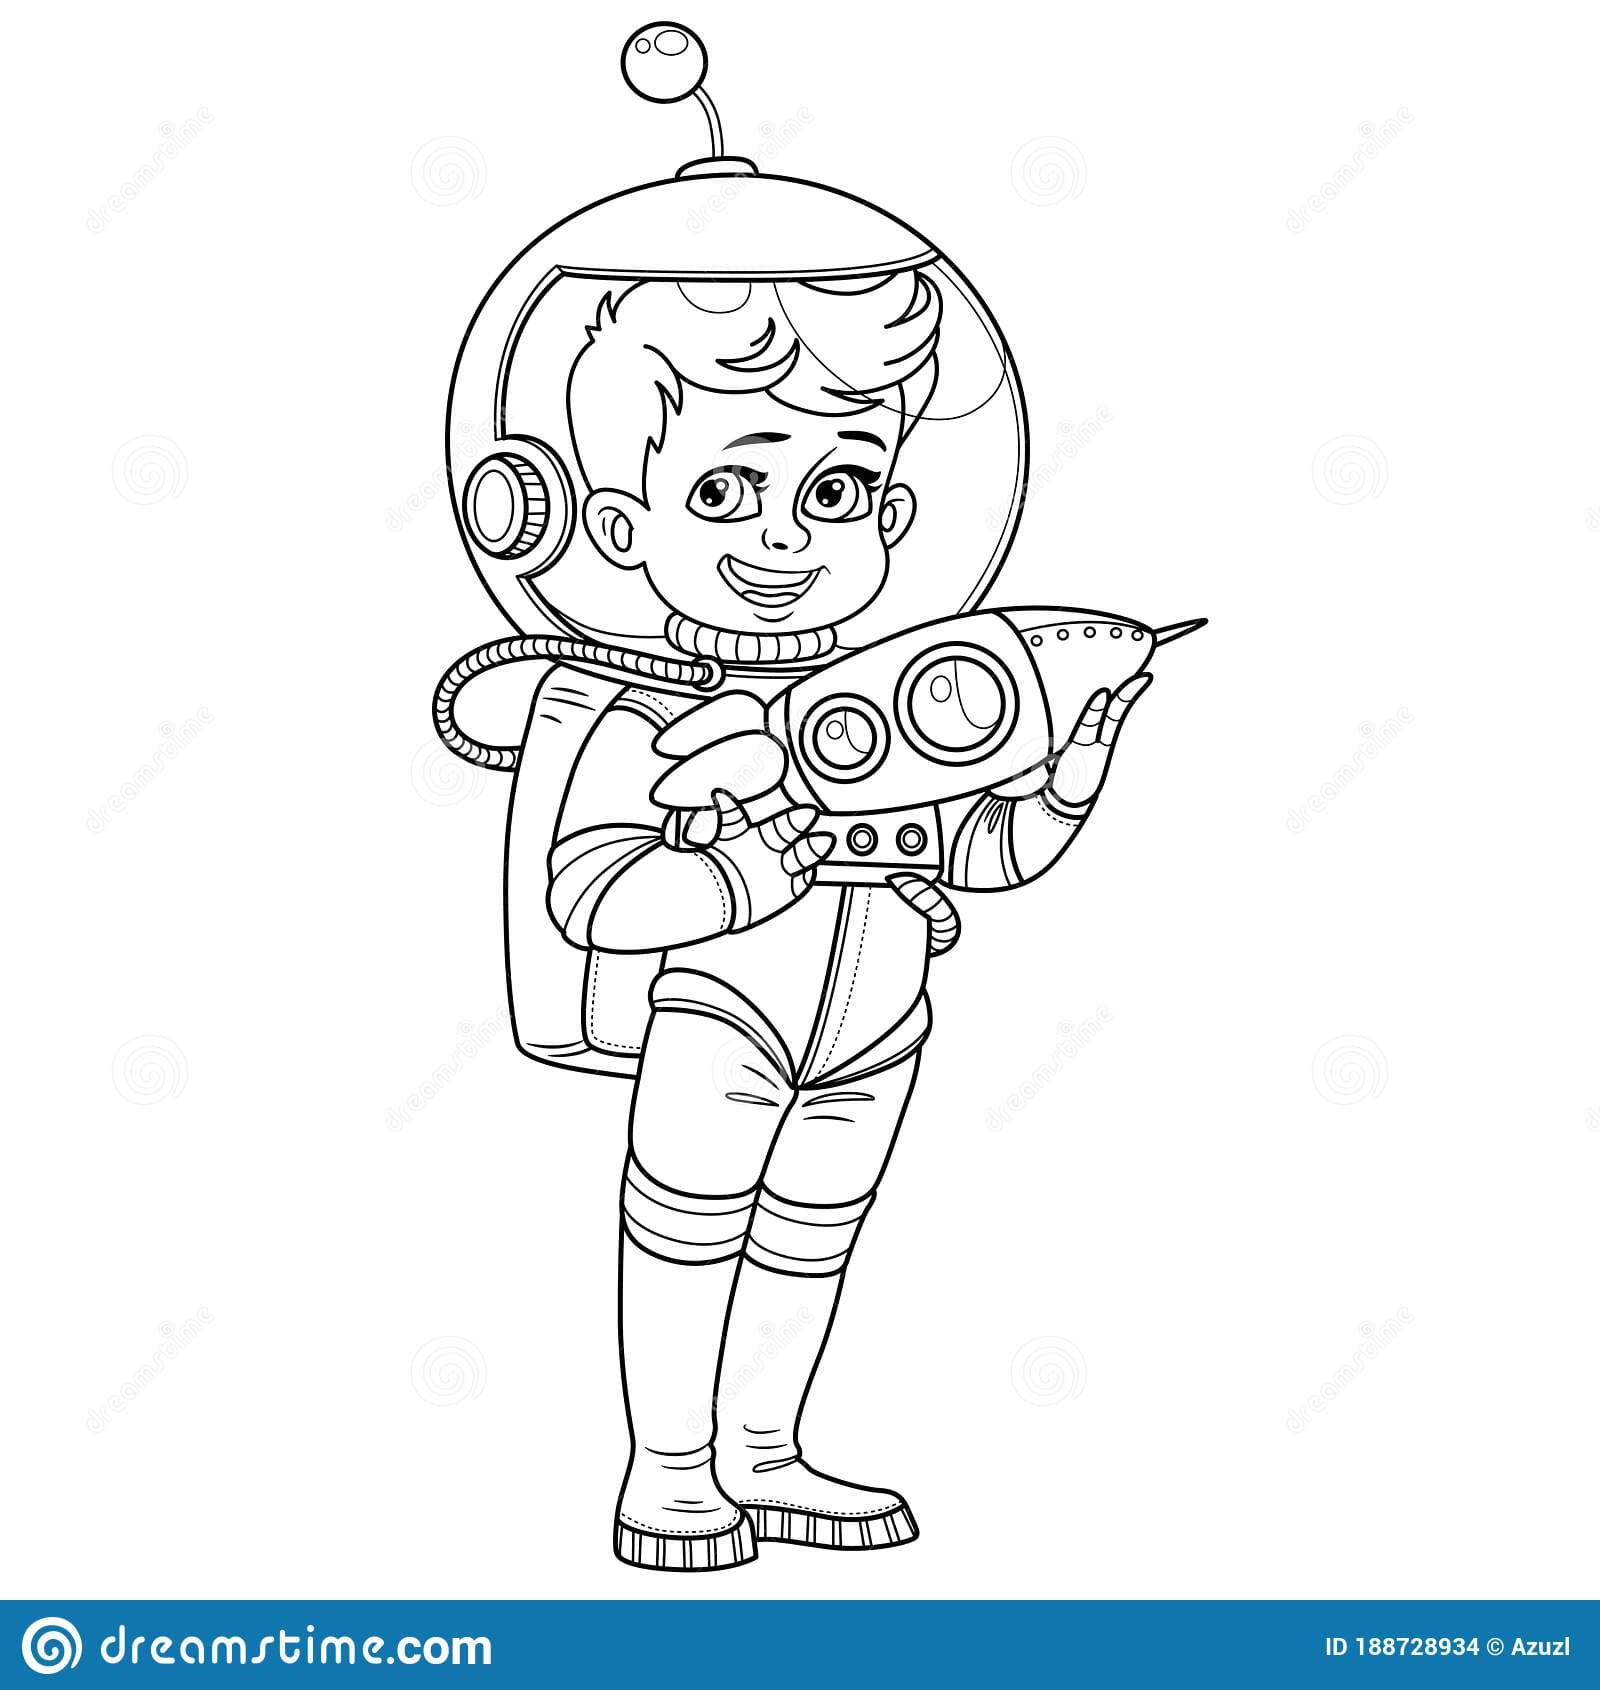 Cute boy in suit of an astronaut with a rocket in his hands outlined for coloring page